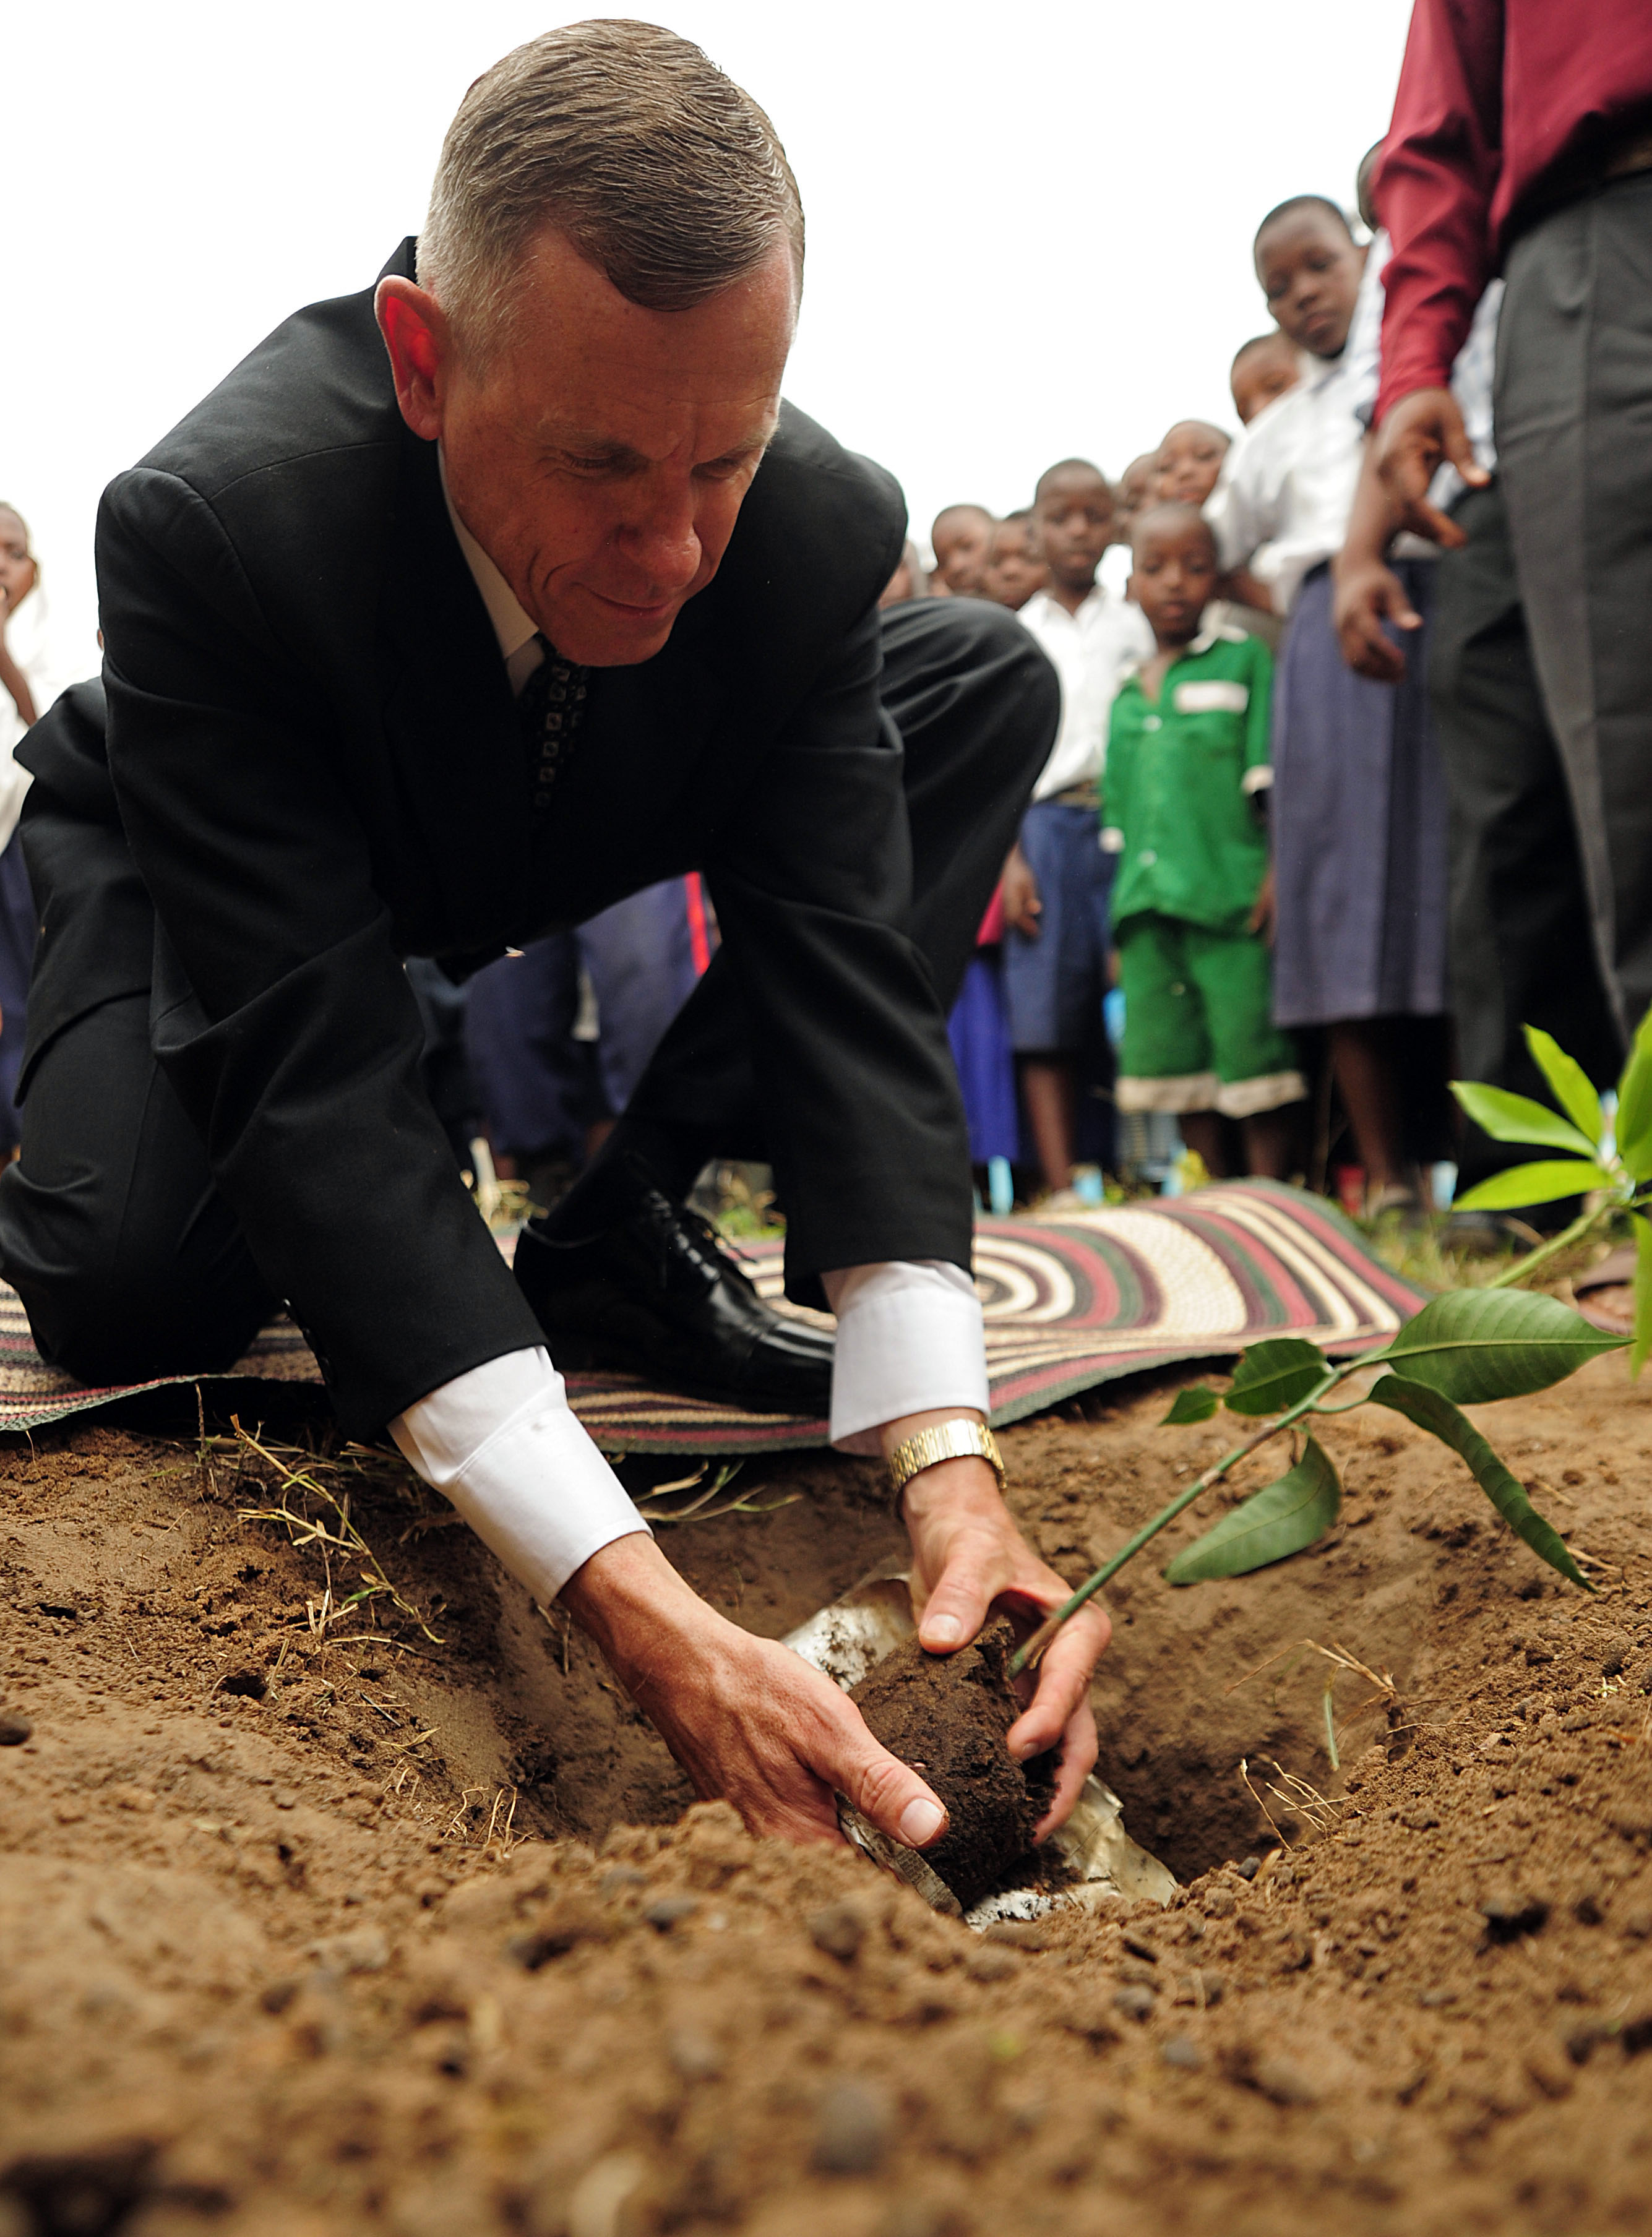 US Navy 090610-F-3682S-401 U.S. Navy Captain Mark Sparling, from Combined Joint Task Force-Horn of Africa plants a memorial mango tree during the Ziwani Primary School Renovation Dedication